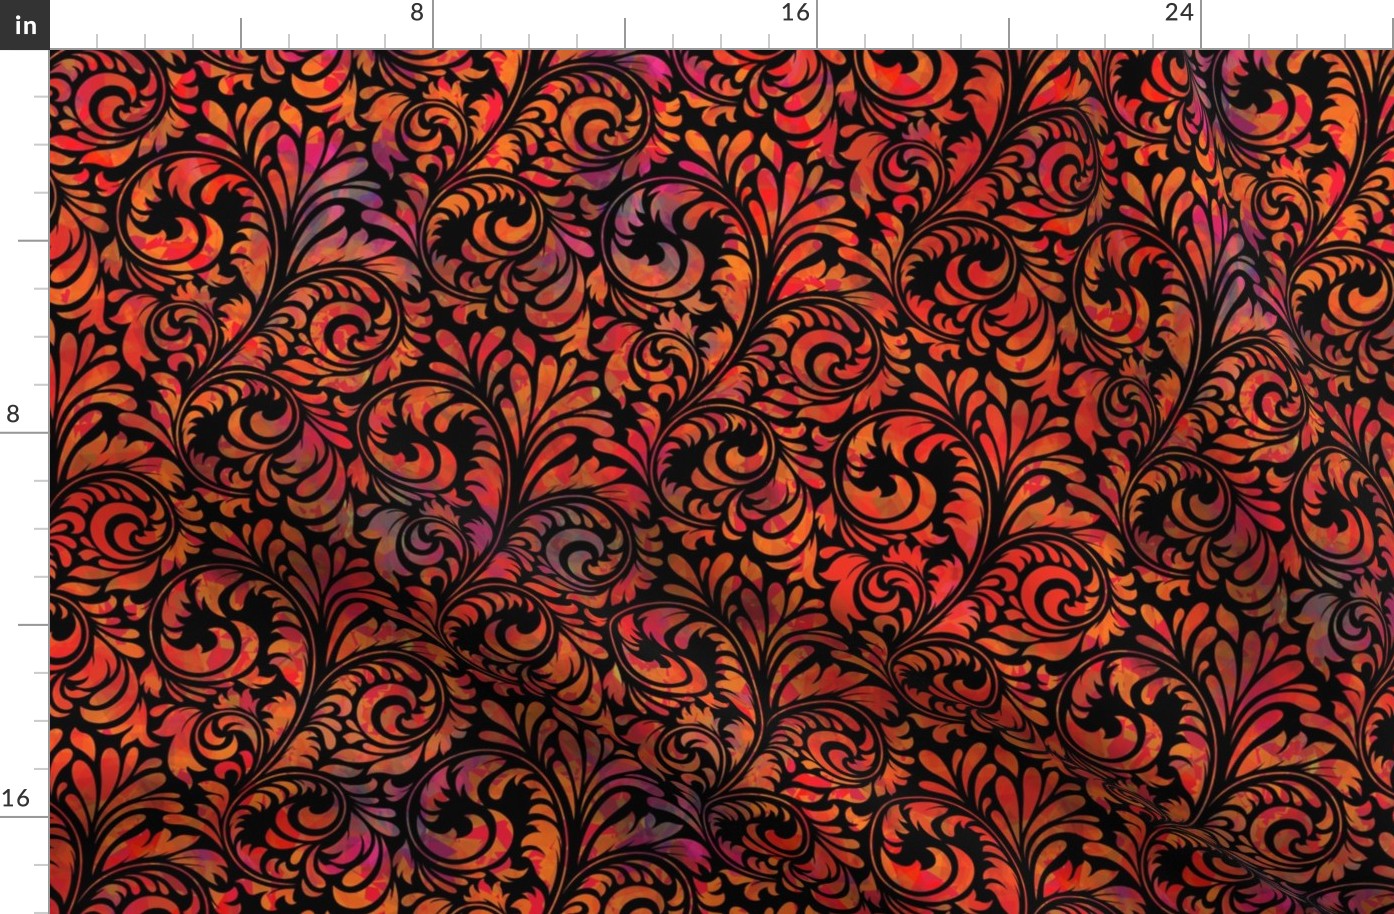 Shimmering Tie-Dye Flourish Brocade in Red and Violet on Black